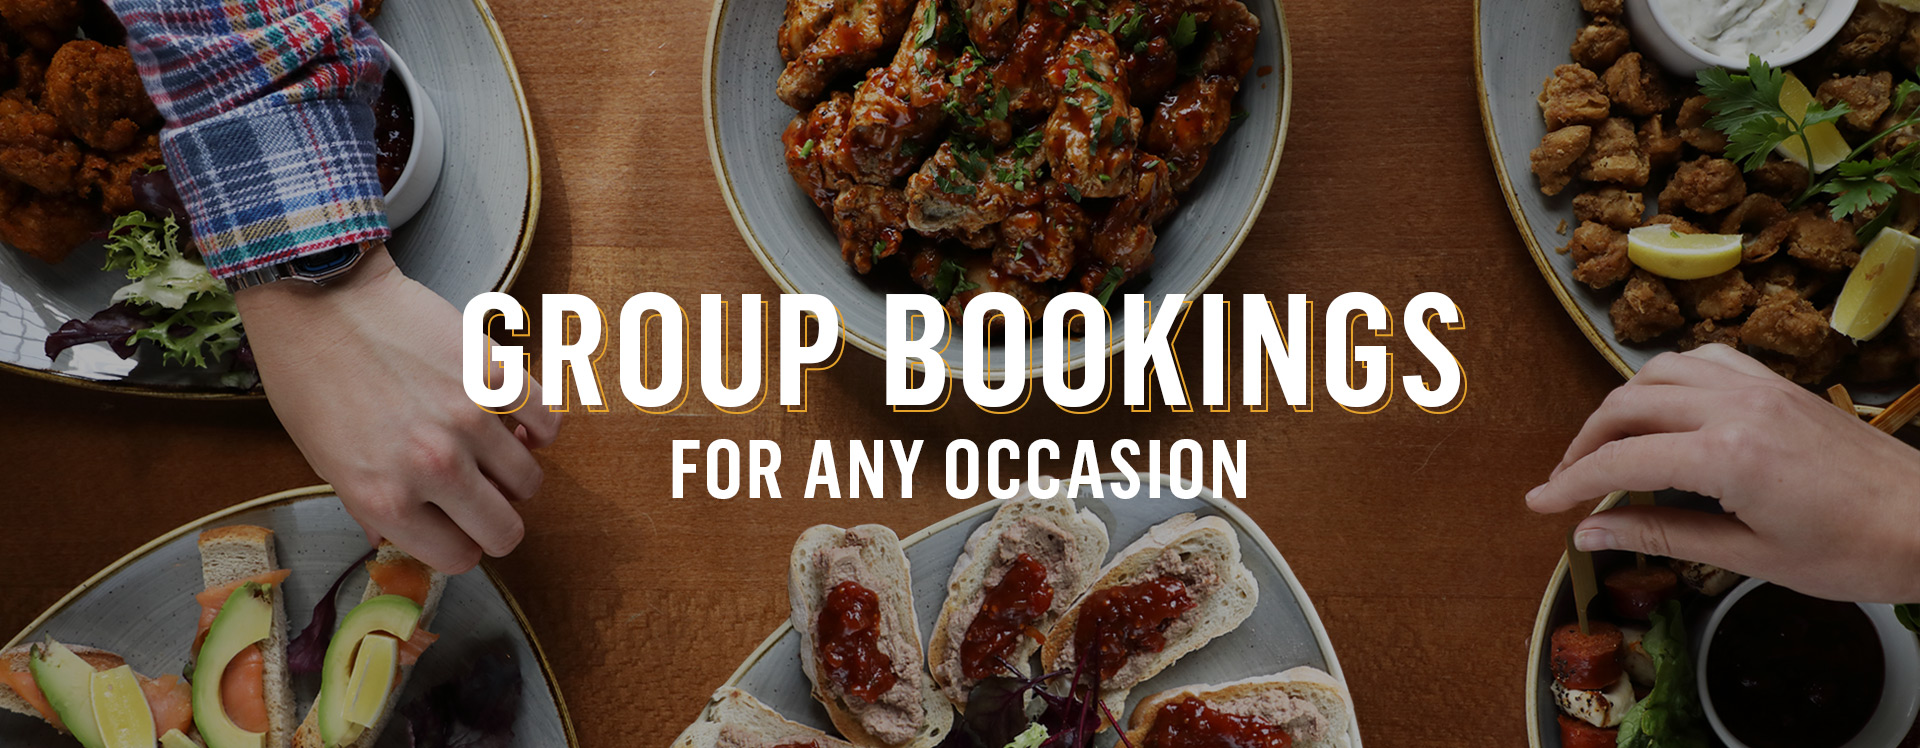 Group Bookings at The Crown Liquor Saloon